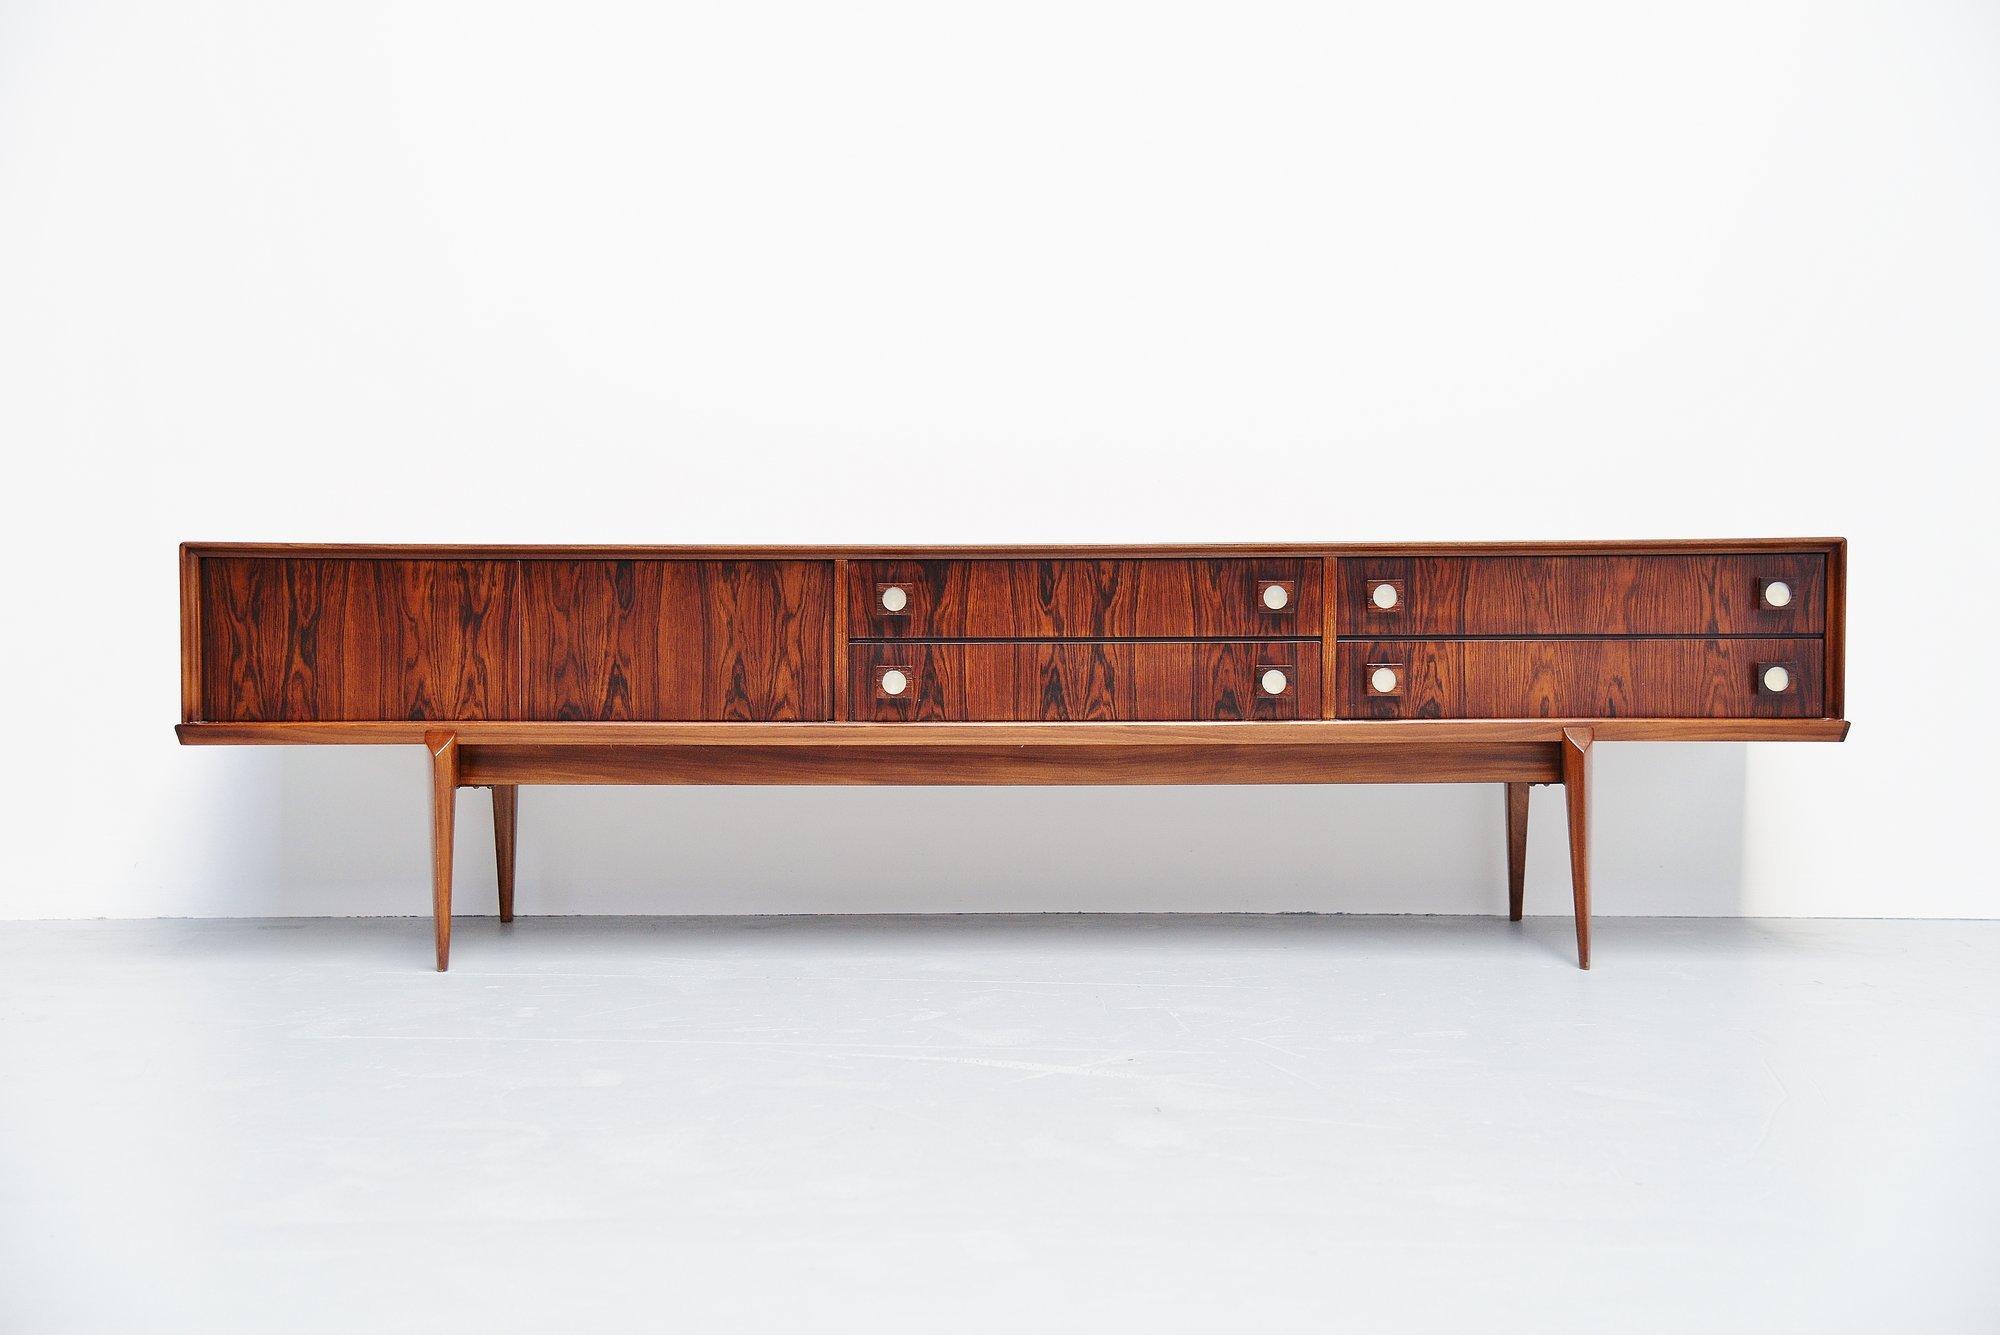 Very nice and quality low sideboard designed by Oswald Vermaercke for V-Form, Belgium 1965. This amazing credenza has a very nice and warm rosewood color and is fully refinished into perfect condition. The designs by Oswald Vermaercke are visibly